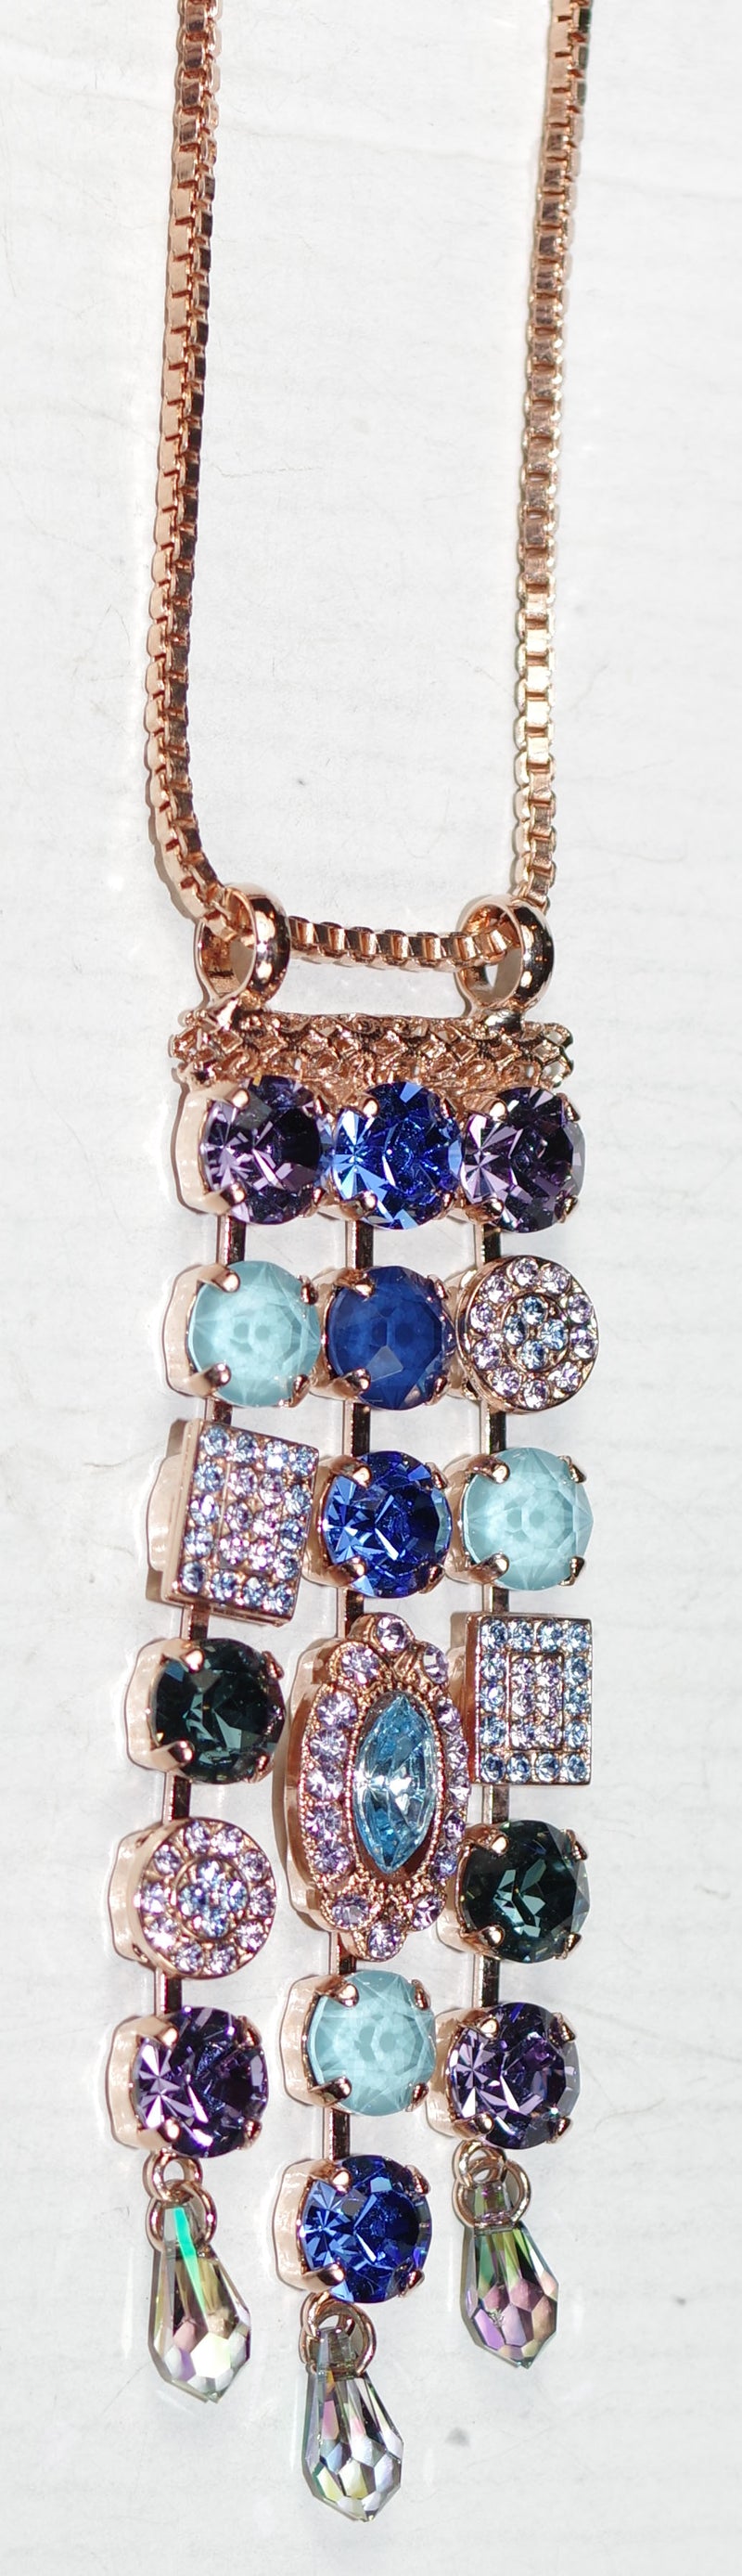 MARIANA PENDANT ELECTRIC BLUE: blue, teal, lavender stones in 3.5" rose gold setting, 28" adjustable chain